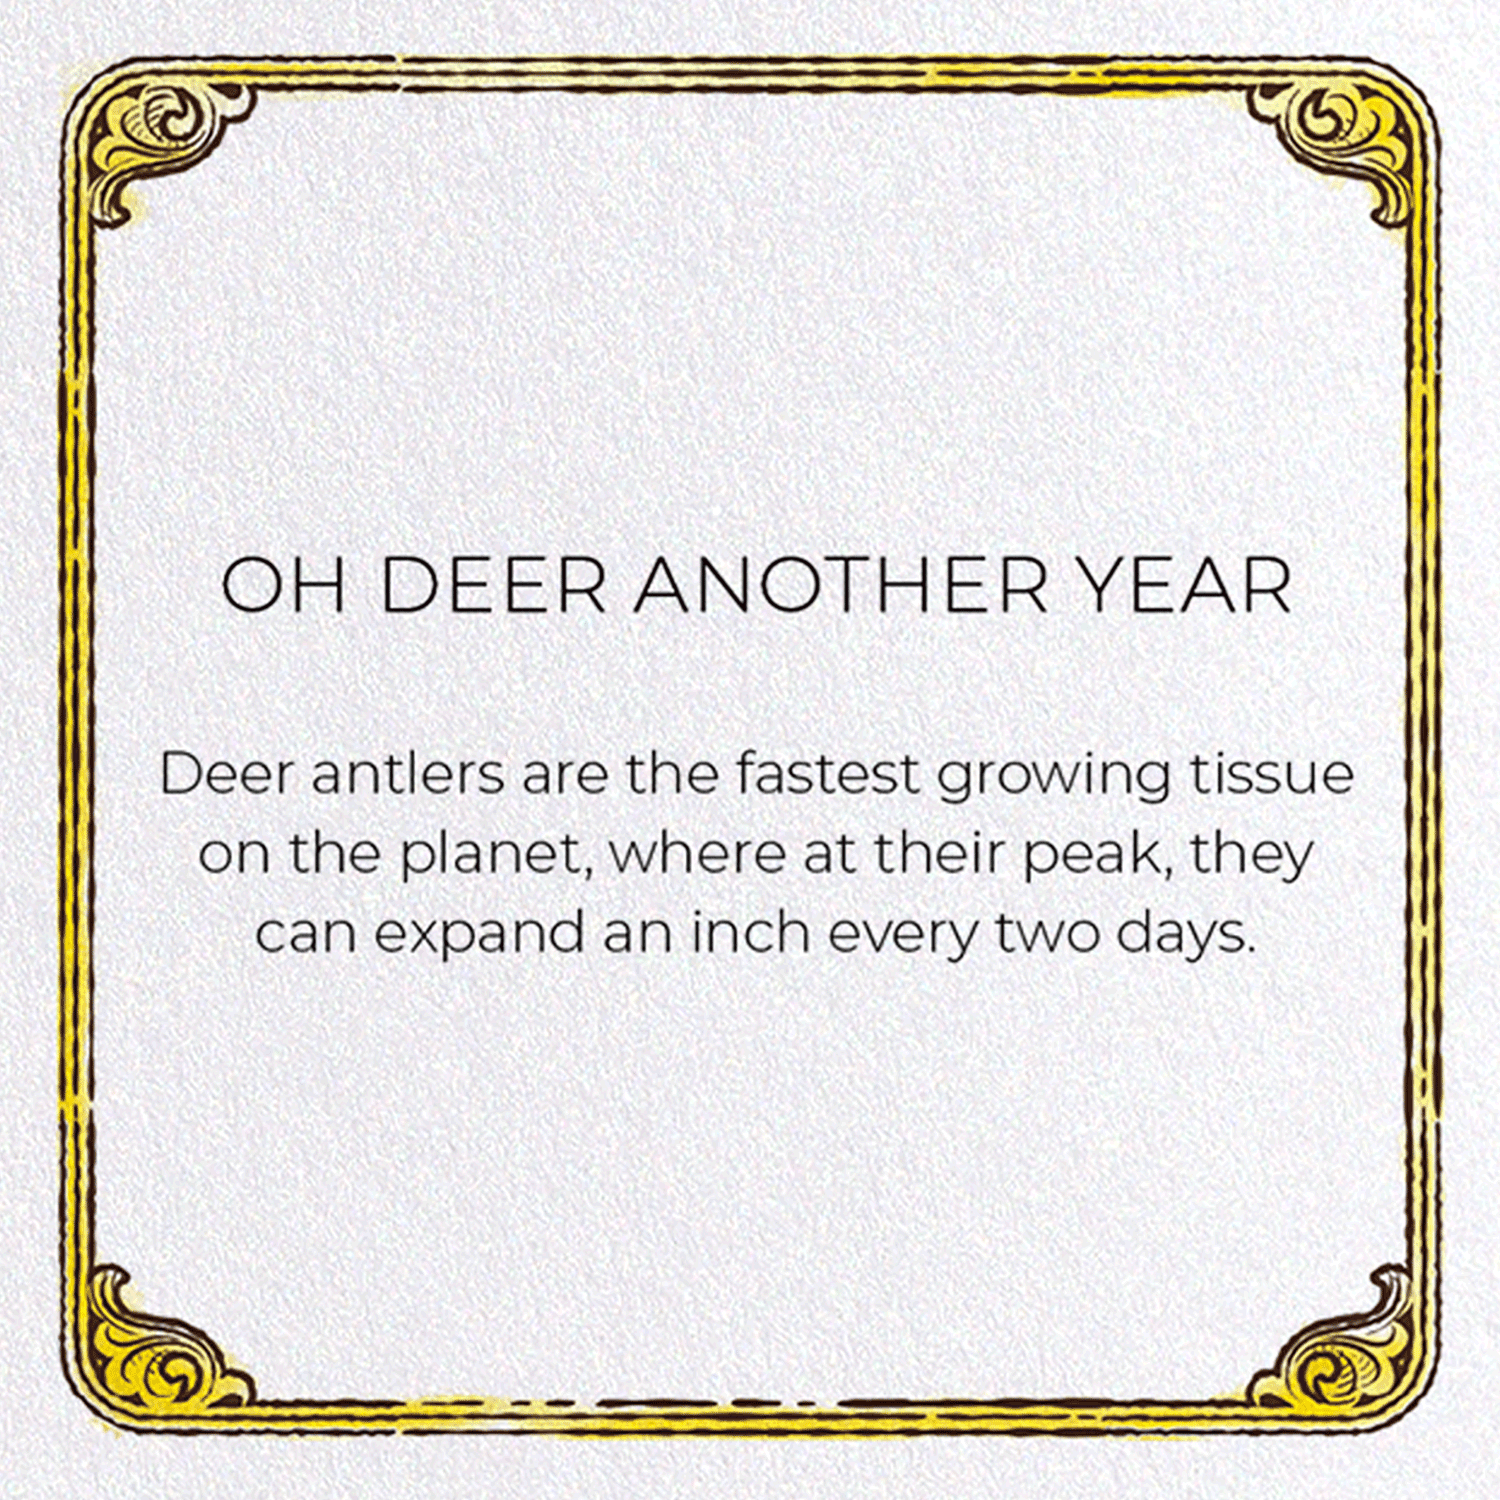 OH DEER ANOTHER YEAR : Victorian Greeting Card